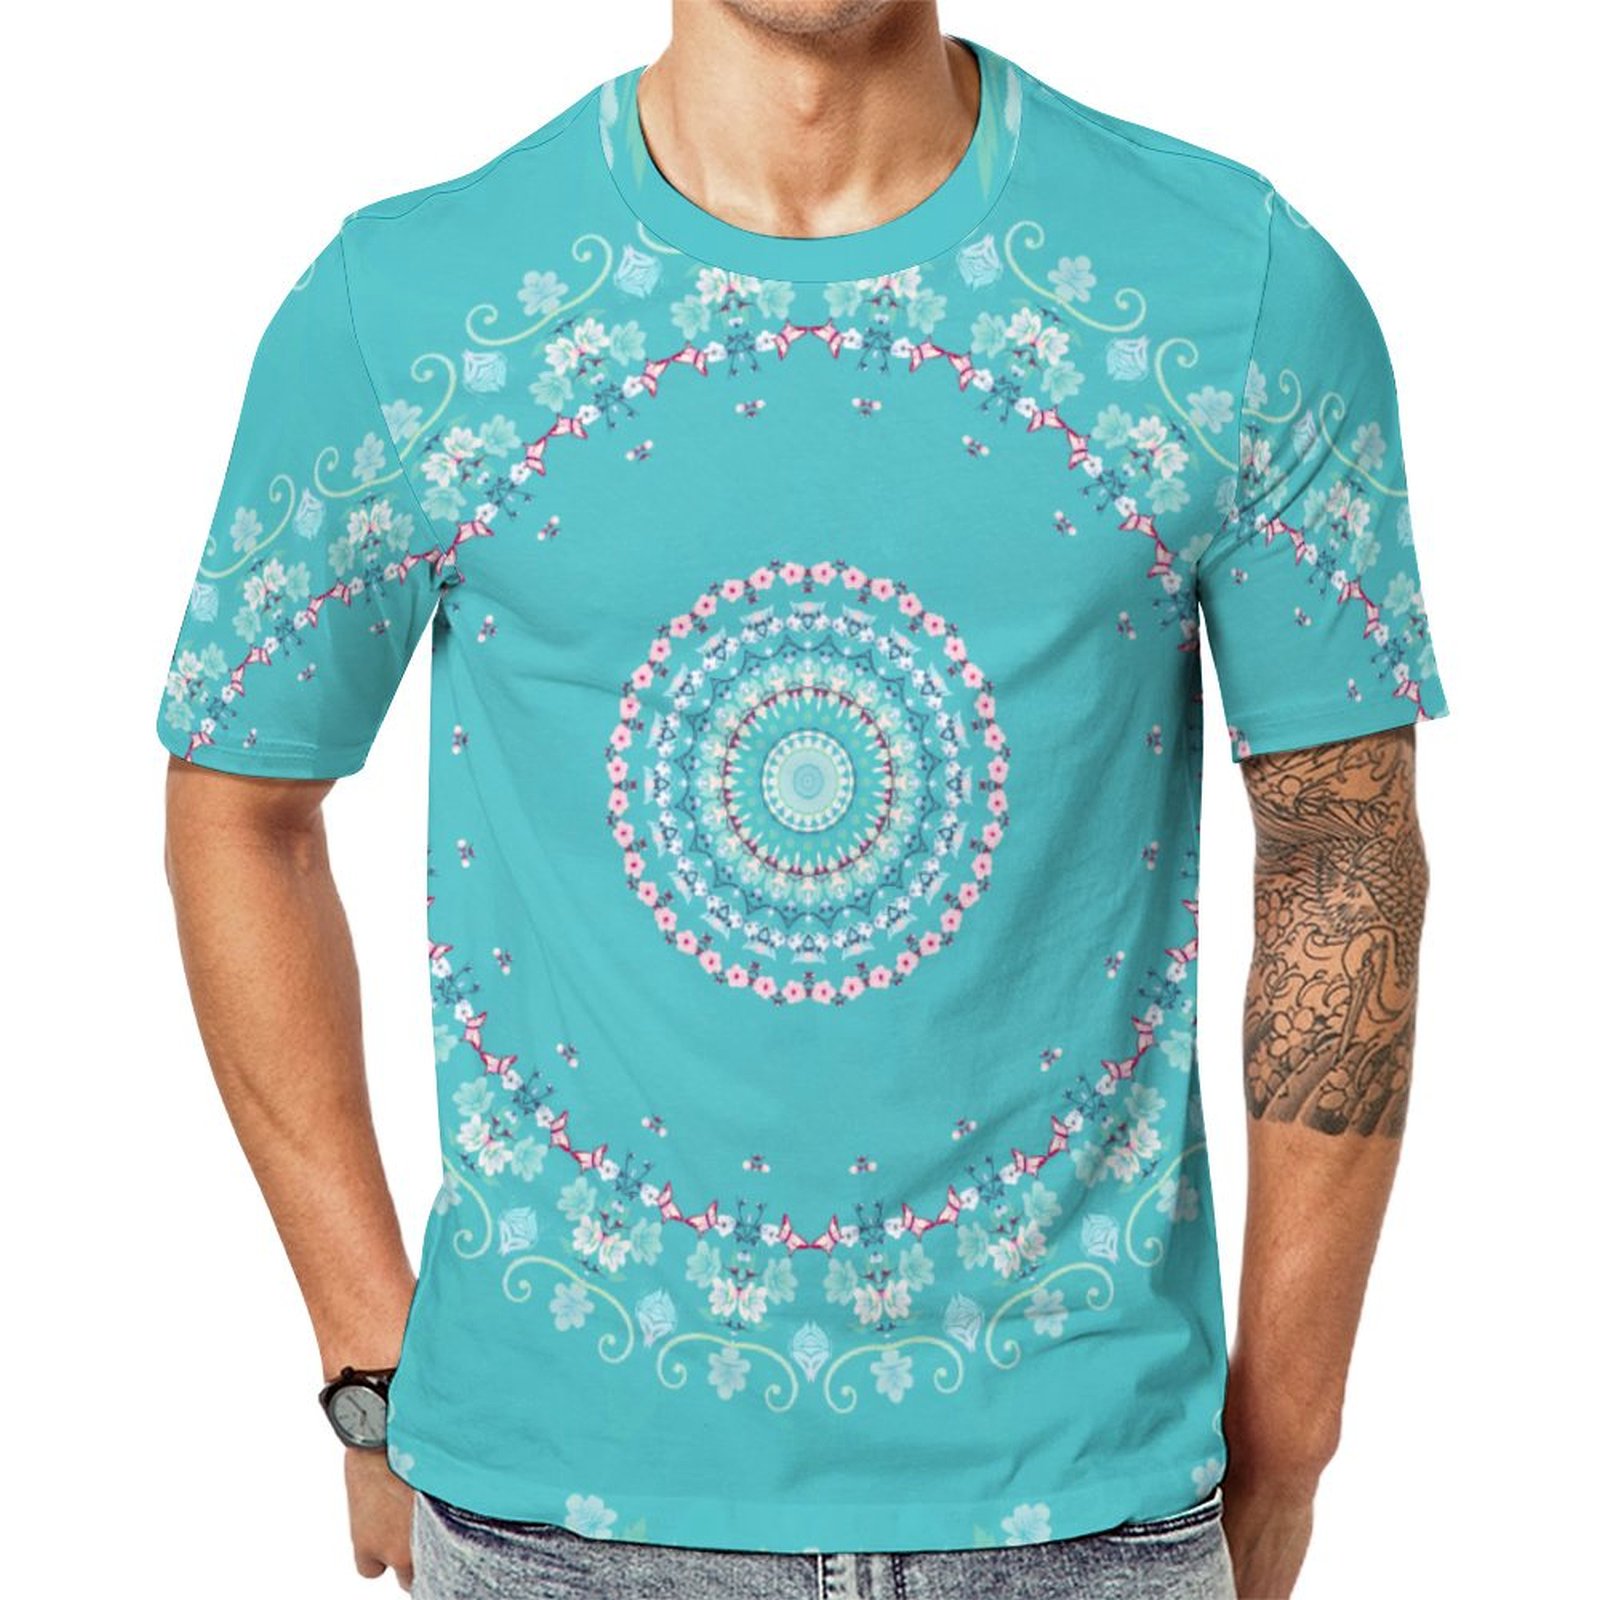 Floral Turquoise Pink Mandala Short Sleeve Print Unisex Tshirt Summer Casual Tees for Men and Women Coolcoshirts